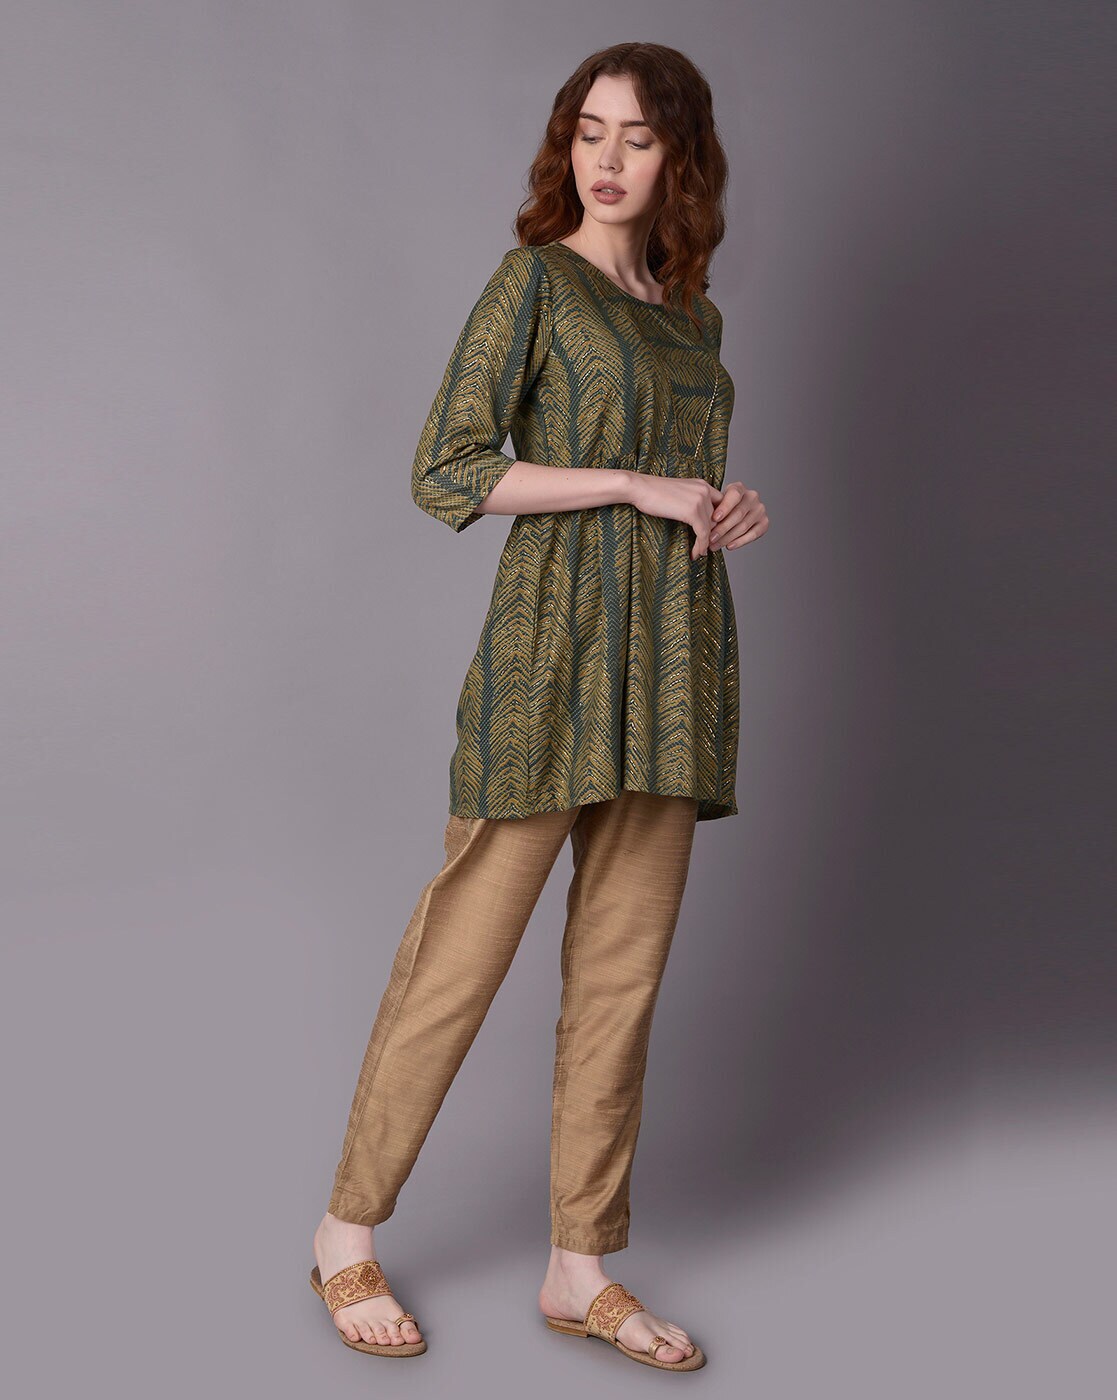 simple kurti at Rs.699/Pieces in lakhimpur offer by shri bankey bihari  online shopping site